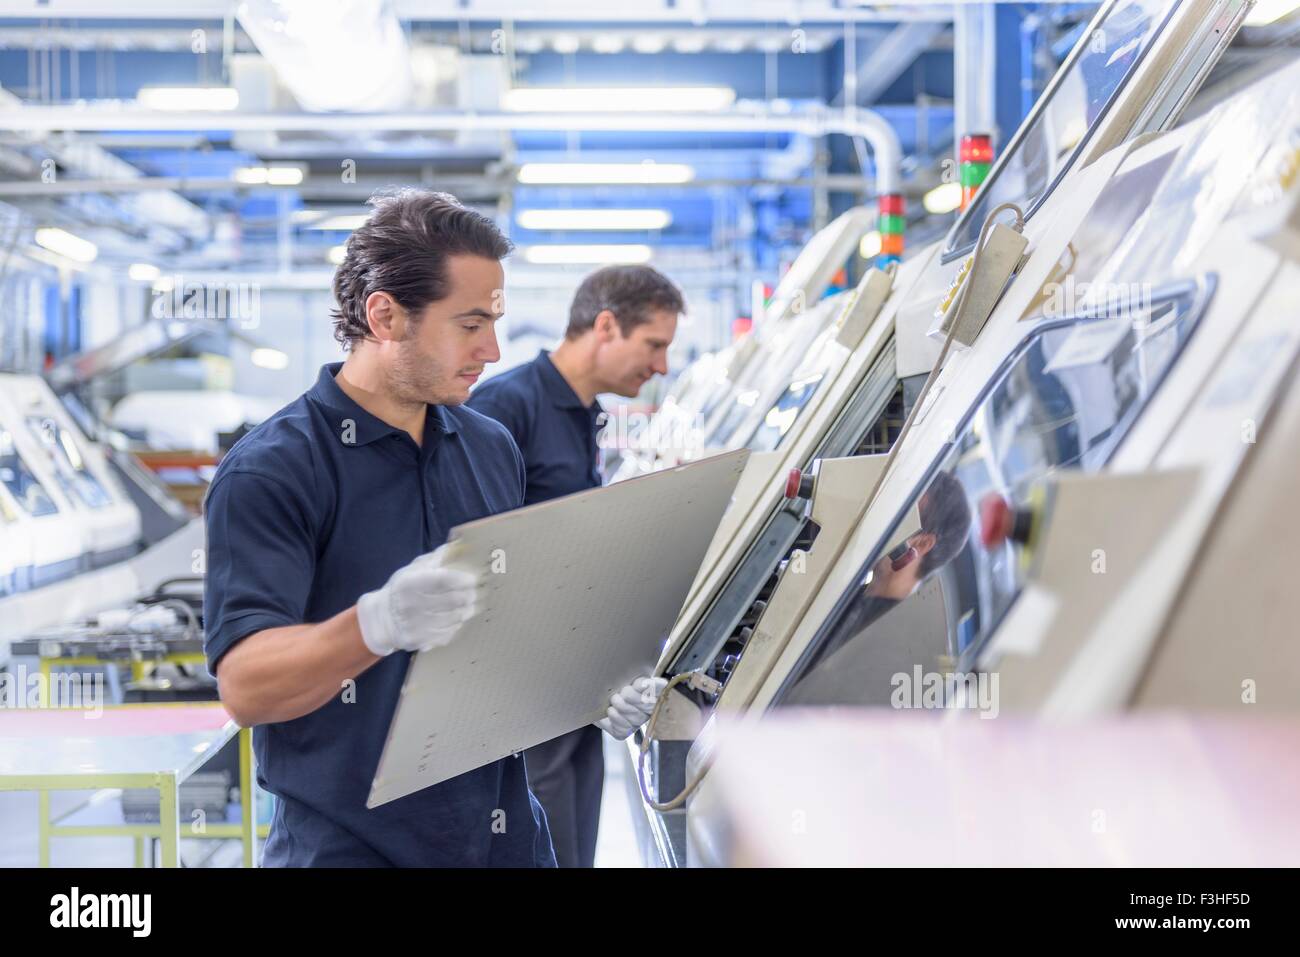 Workers in circuit board manufacturing factory Stock Photo